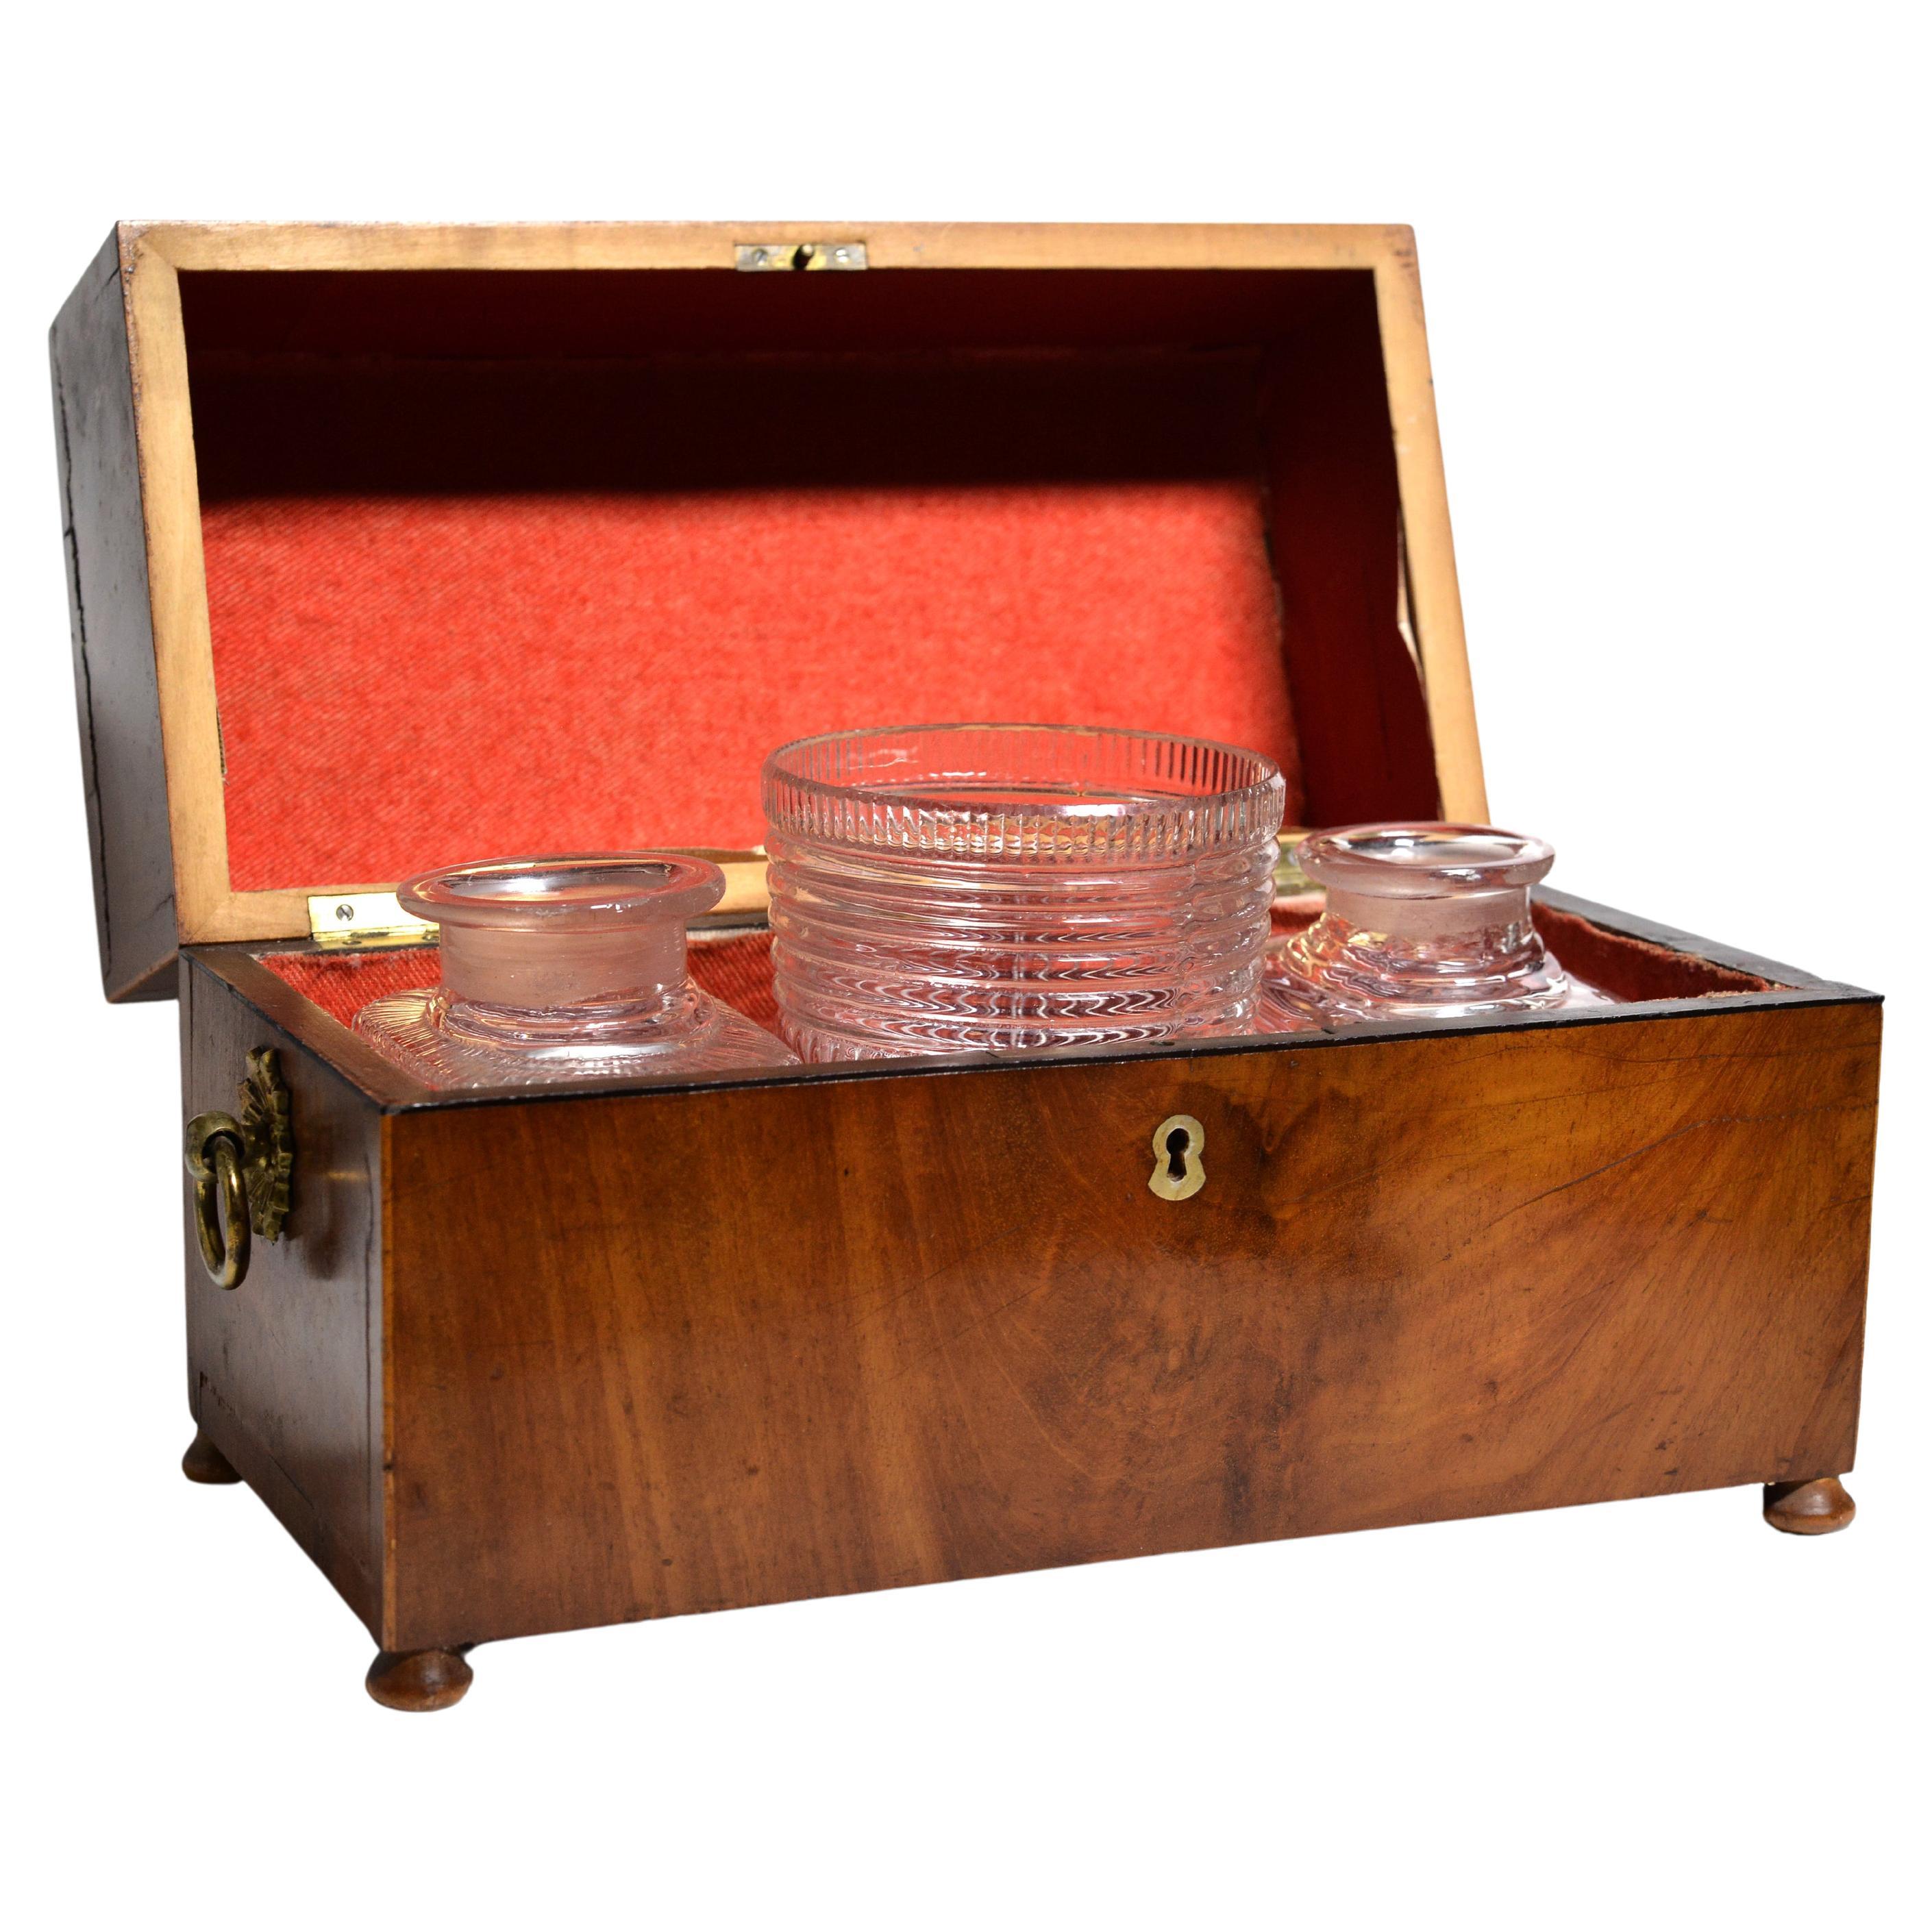 Mahogany Empire Tea Caddy Wooden Casket Box with Glass early 19th century For Sale